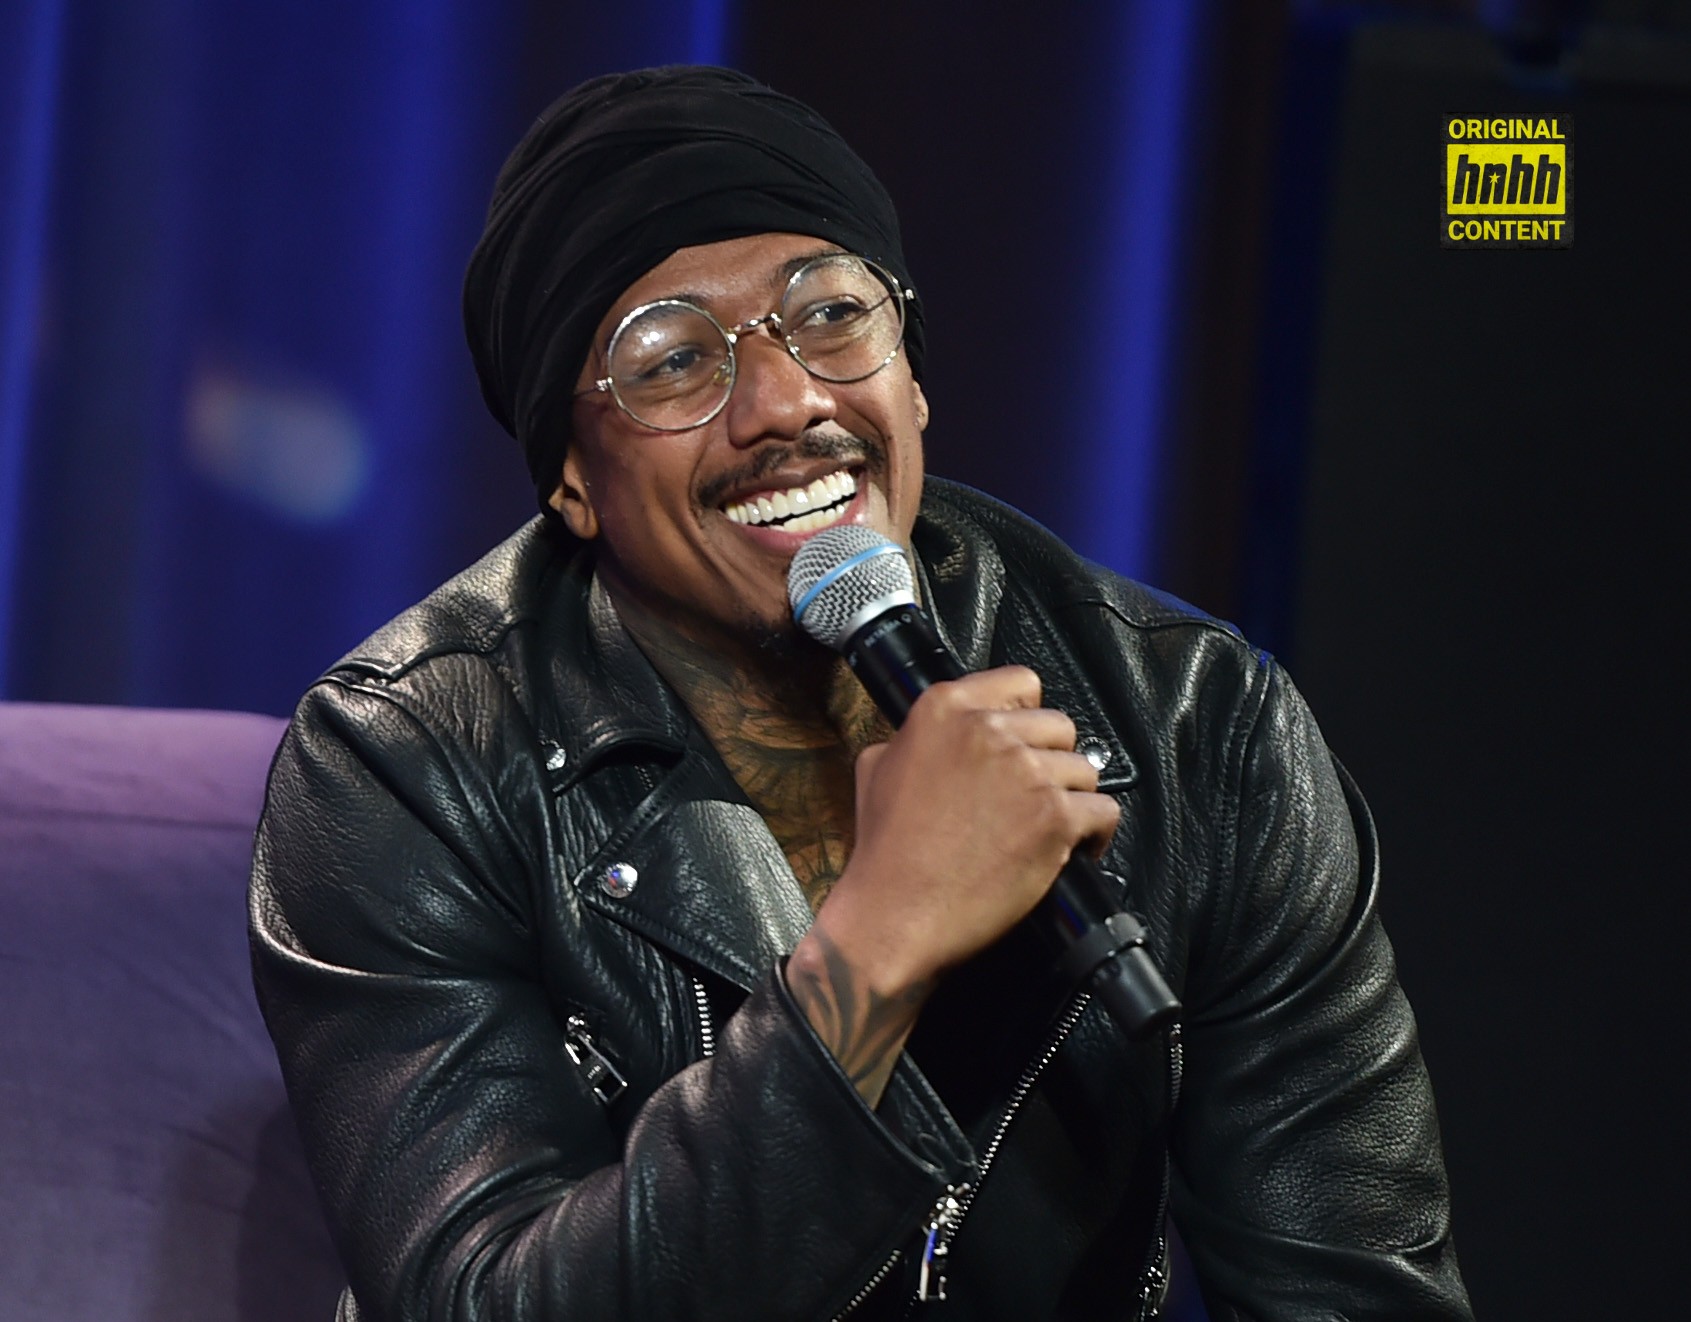 Nick Cannon On His “Future Superstars Tour,” Generational Wealth, & Maintaining A Legacy Of Compassion